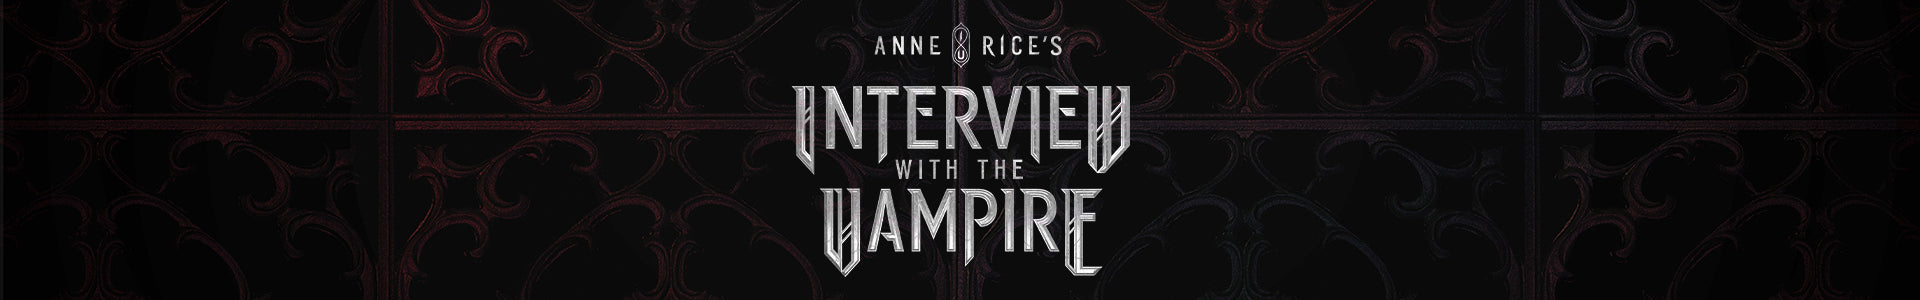 Anne Rice's Interview With The Vampire